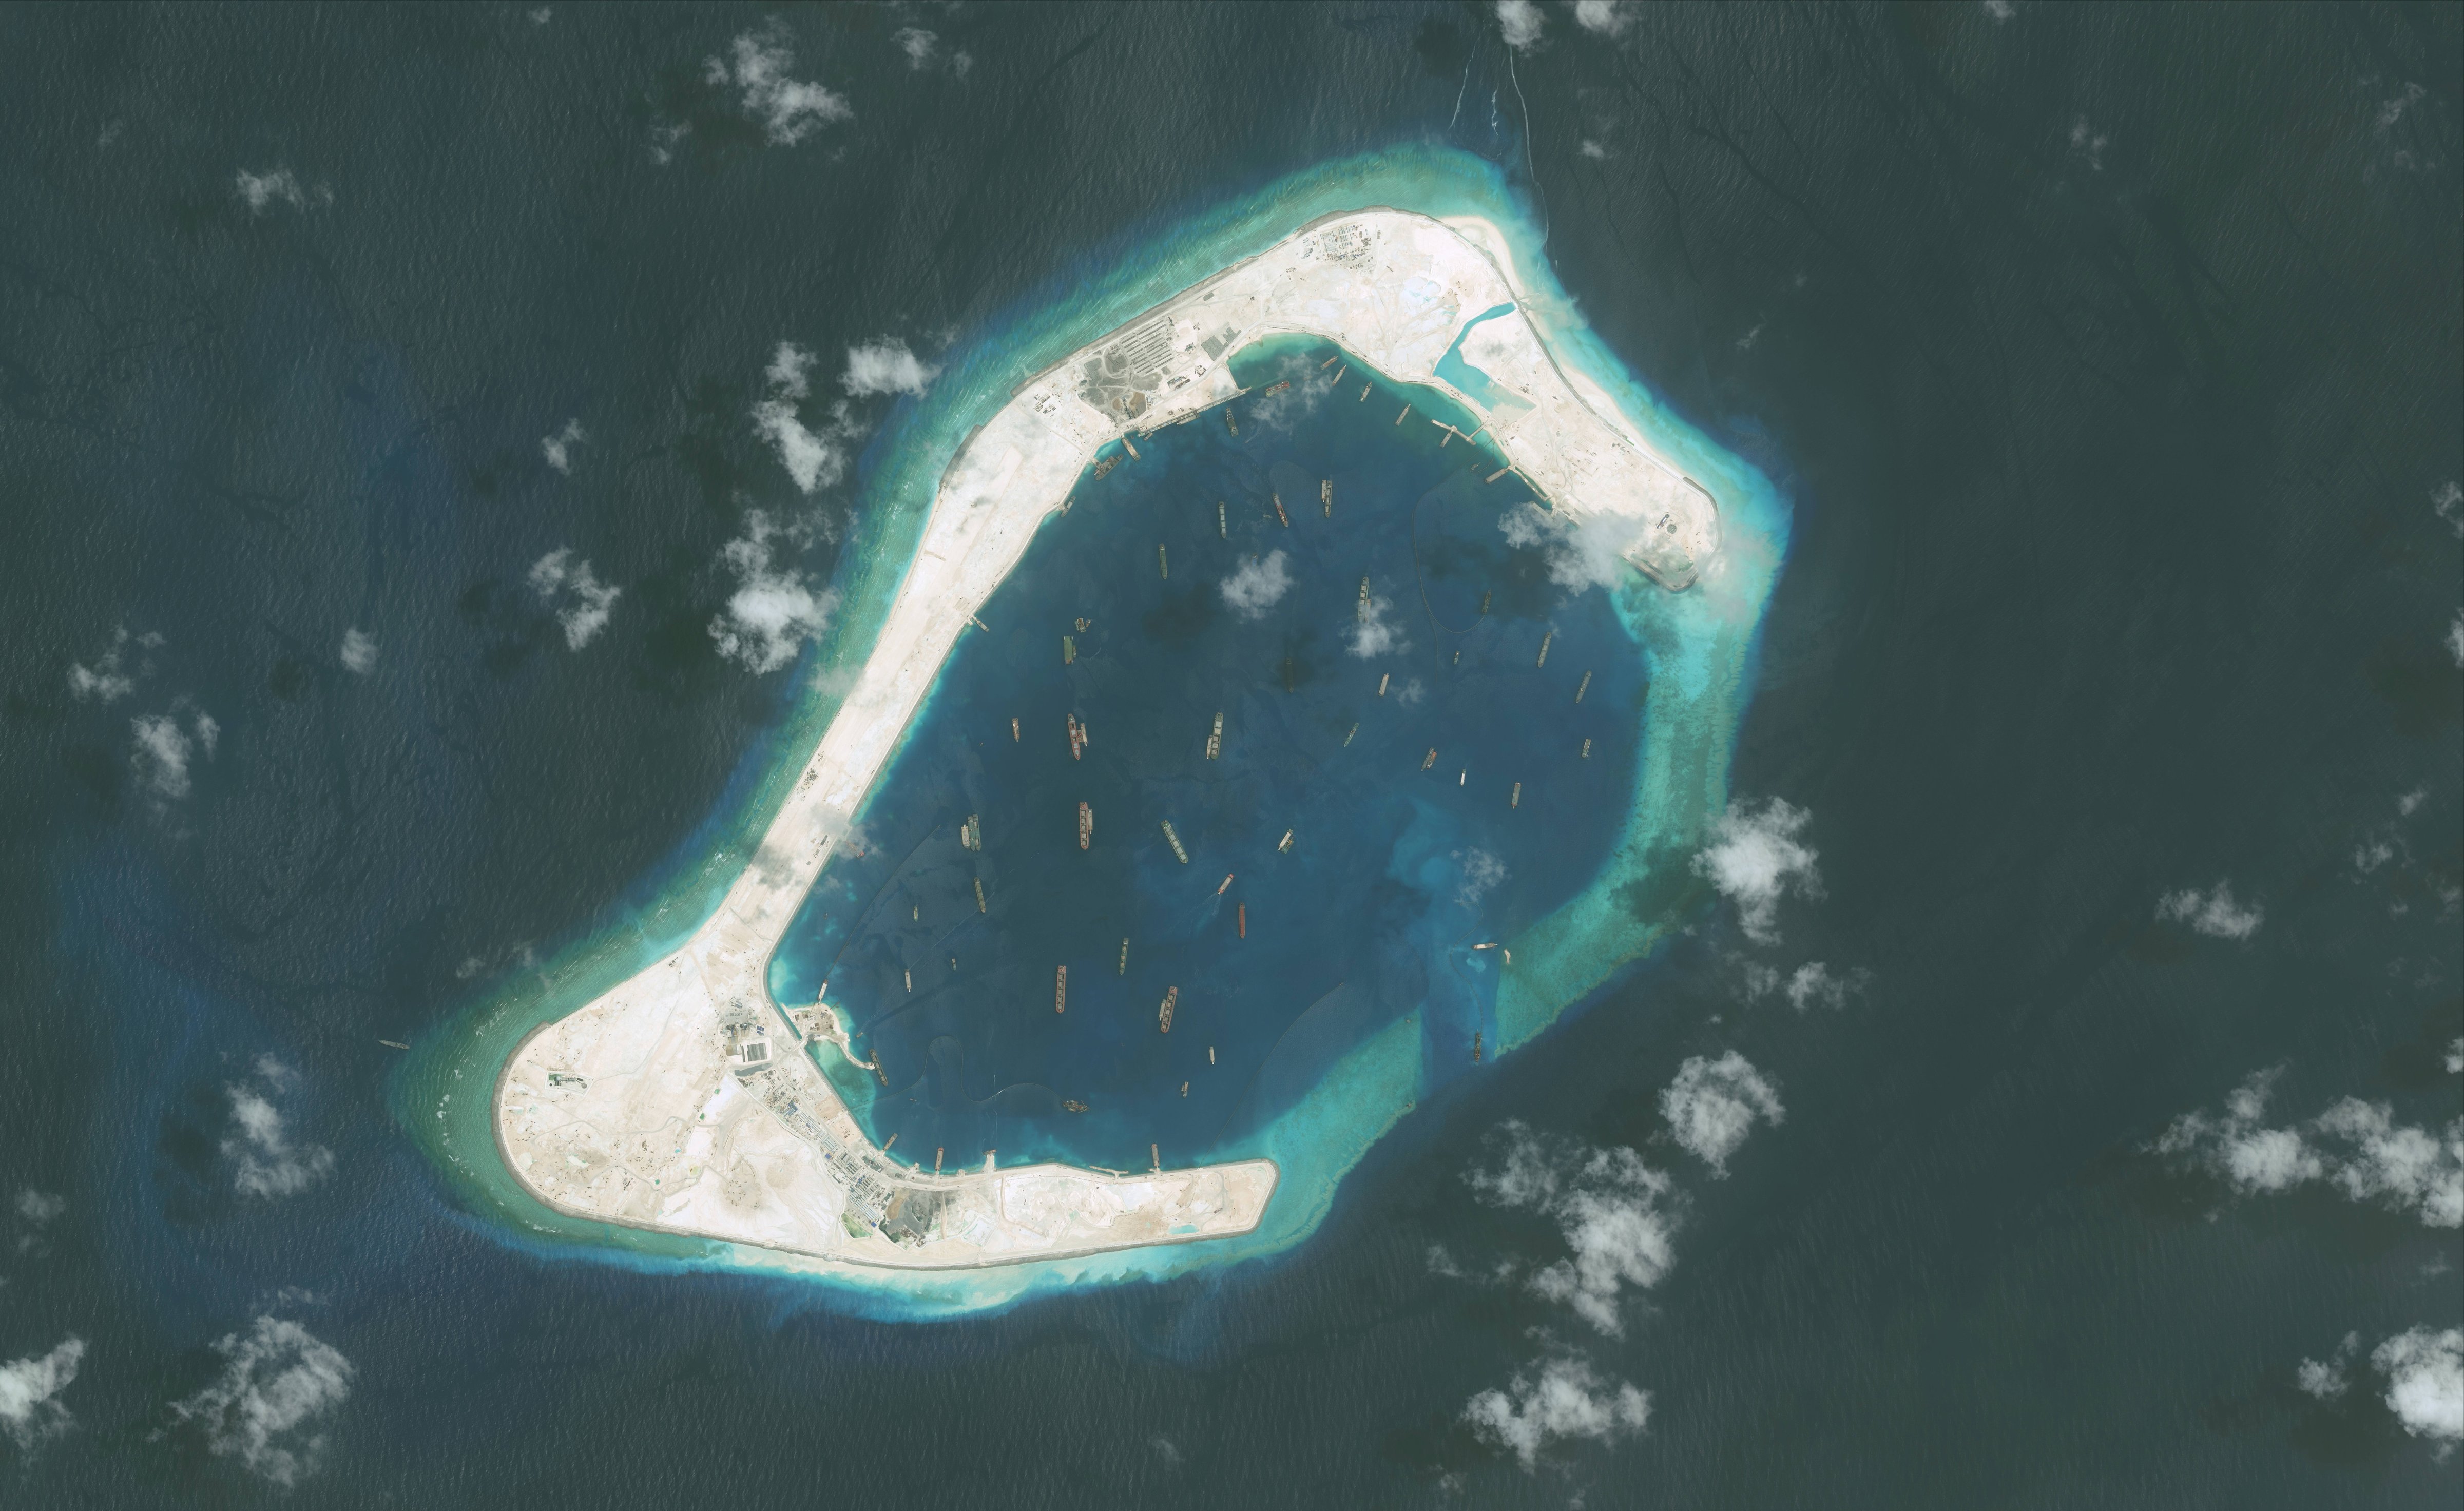 DigitalGlobe imagery of the Subi Reef in the South China Sea, a part of the Spratly Islands group, Sept. 1, 2015. (DigitalGlobe/ScapeWare3d&mdash;DigitalGlobe/Getty Images)